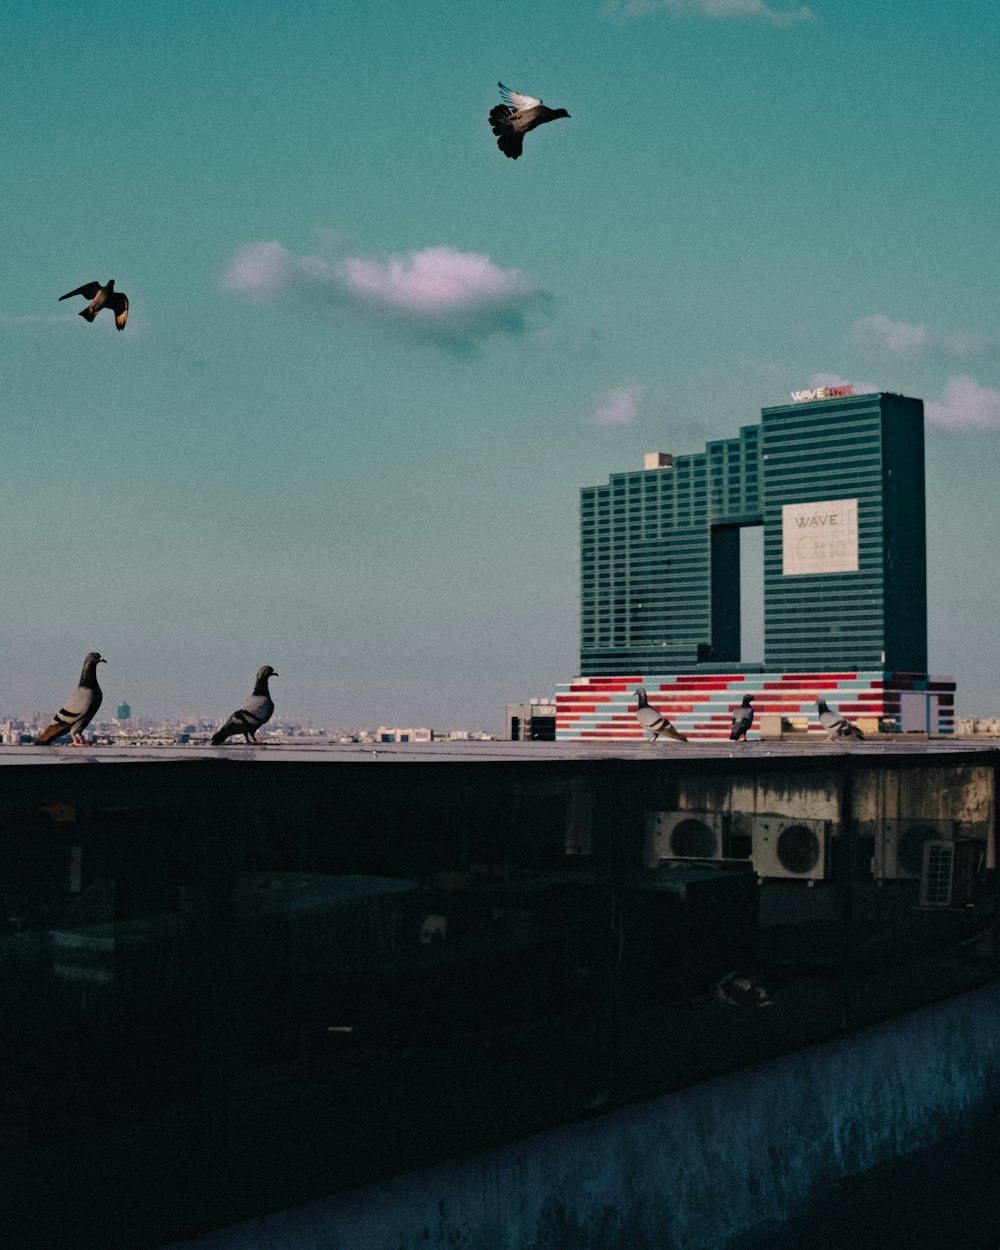 birds flying over a building and a body of water